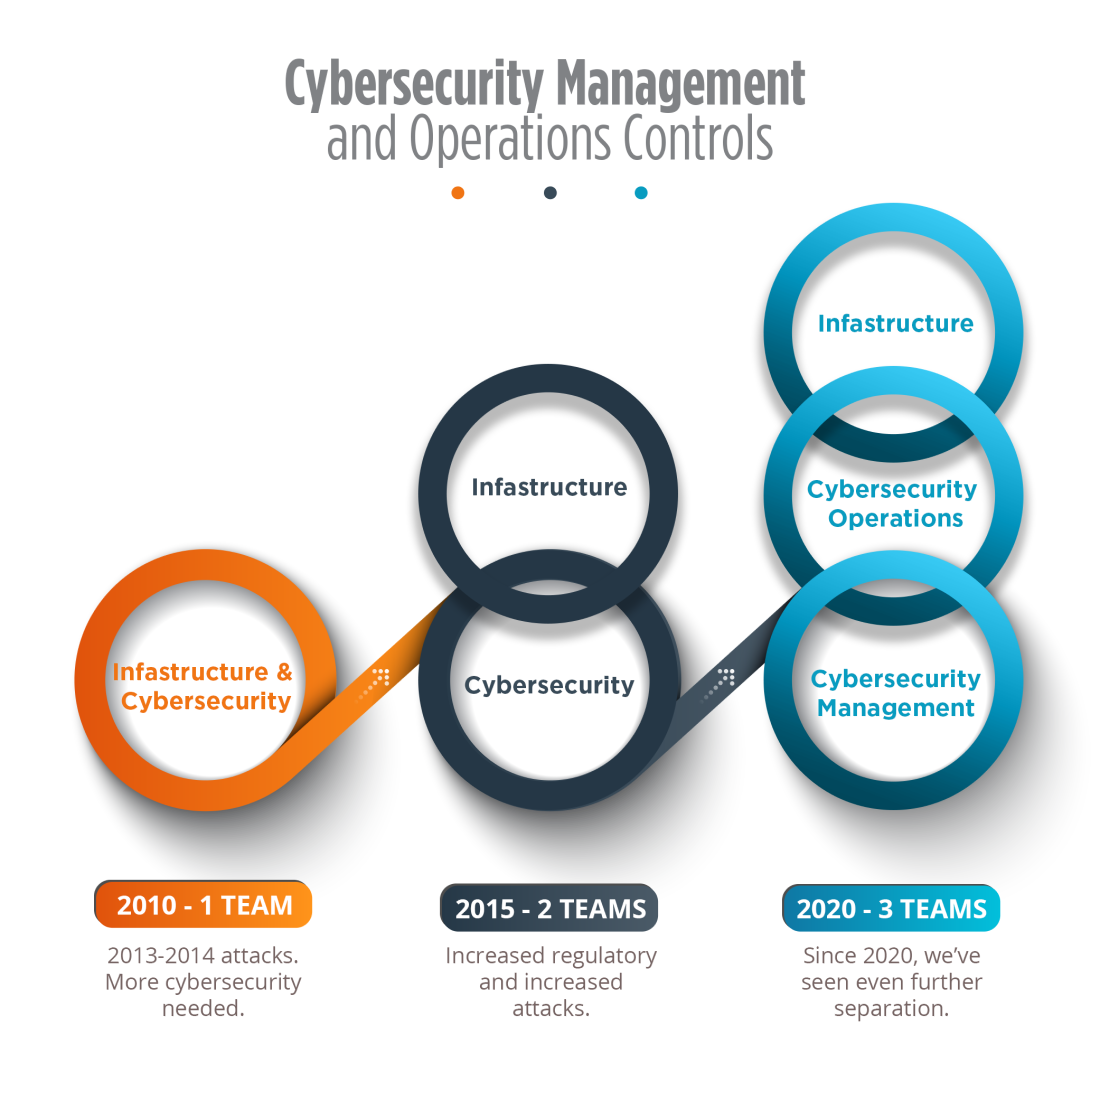 Cybersecurity Management and Operations Controls image showing attacks by team size 